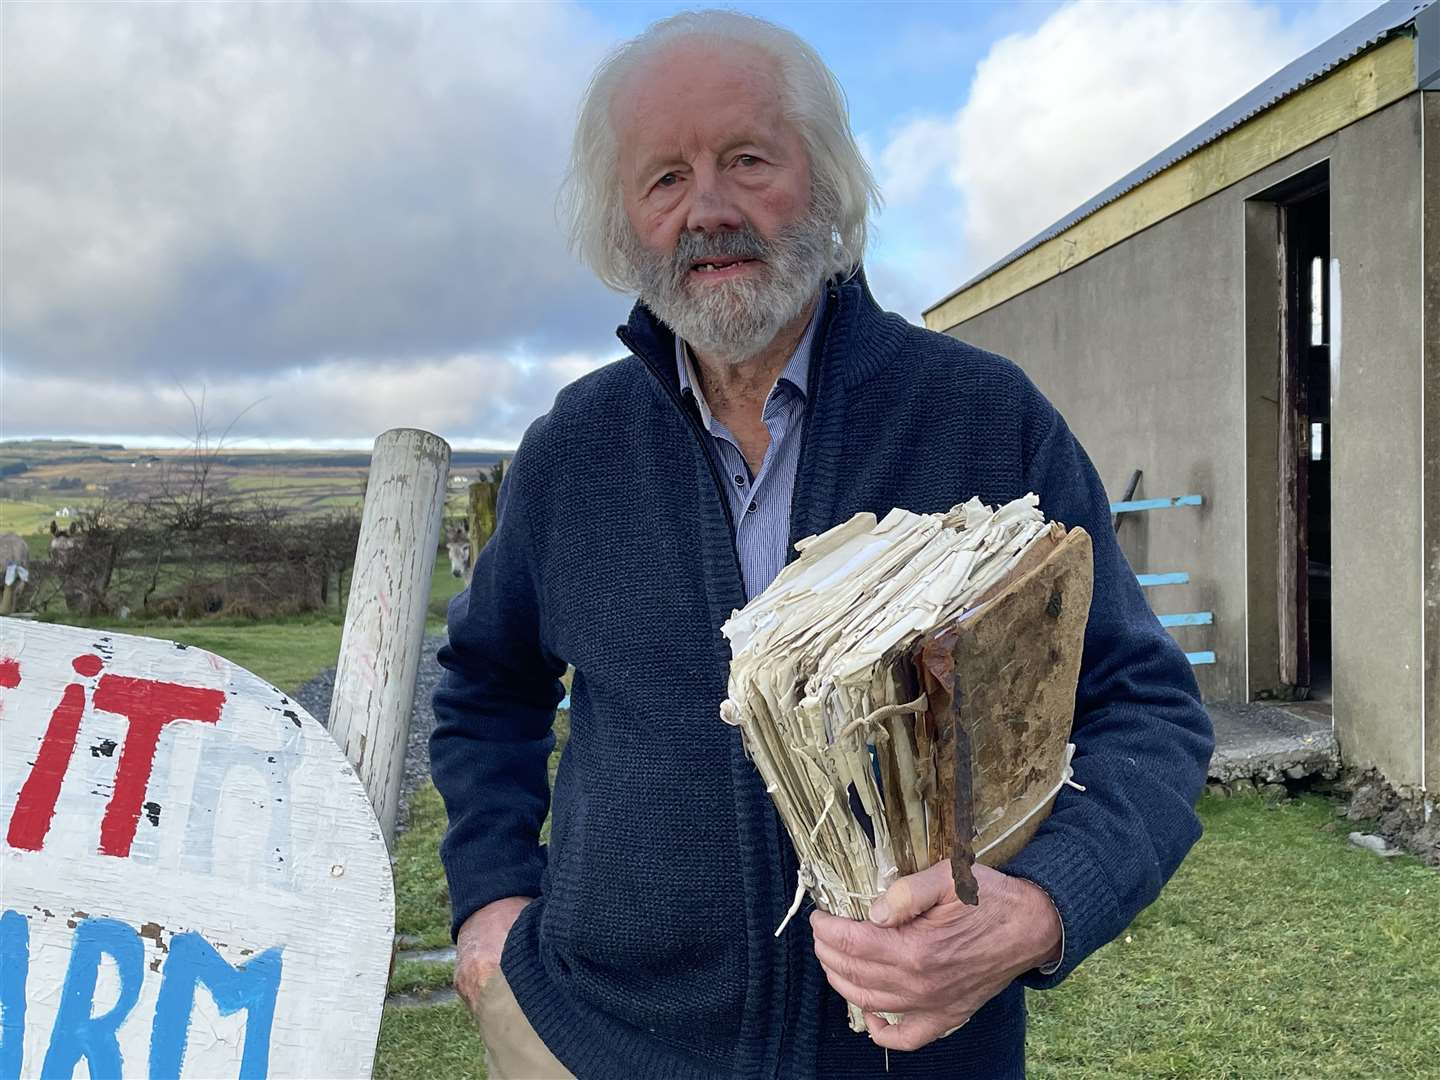 Irish traditional matchmaker Willie Daly, who has a donkey farm in Co Clare, has been bringing couples together since he was a teenager (Rebecca Black/PA)